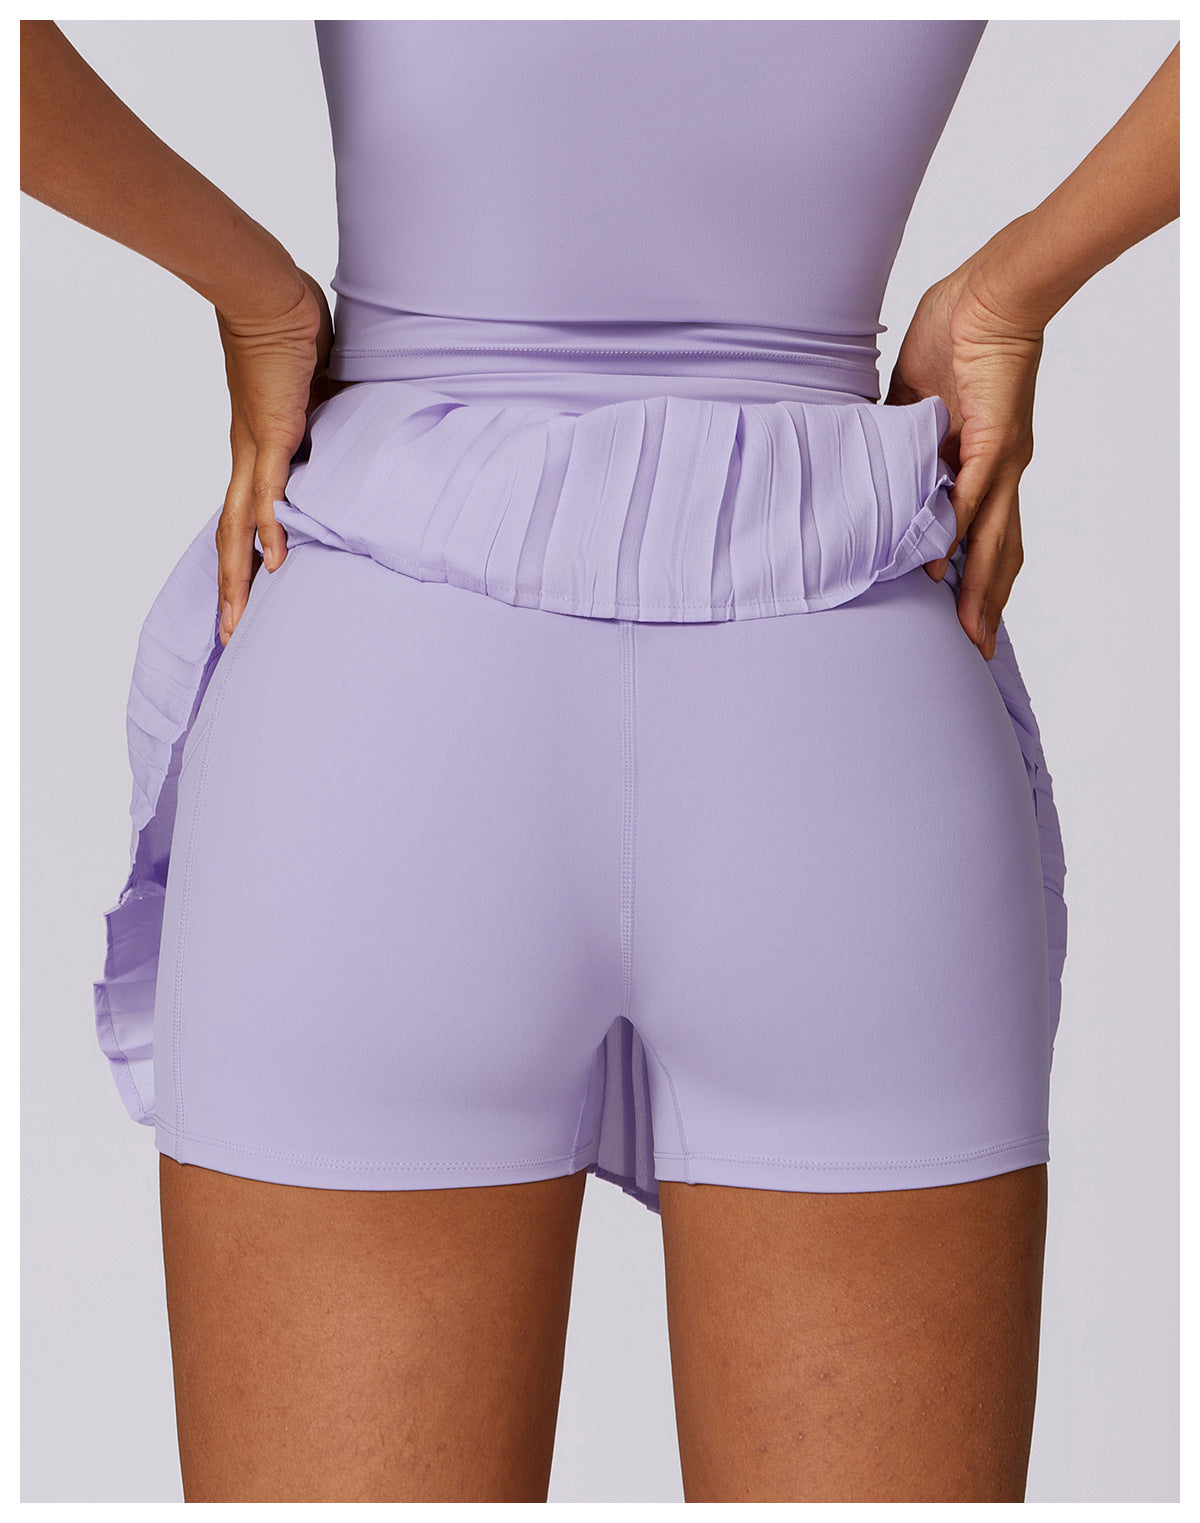 Faux Two Piece Quick Drying Tennis Culottes Anti Exposure Fitness Skirt